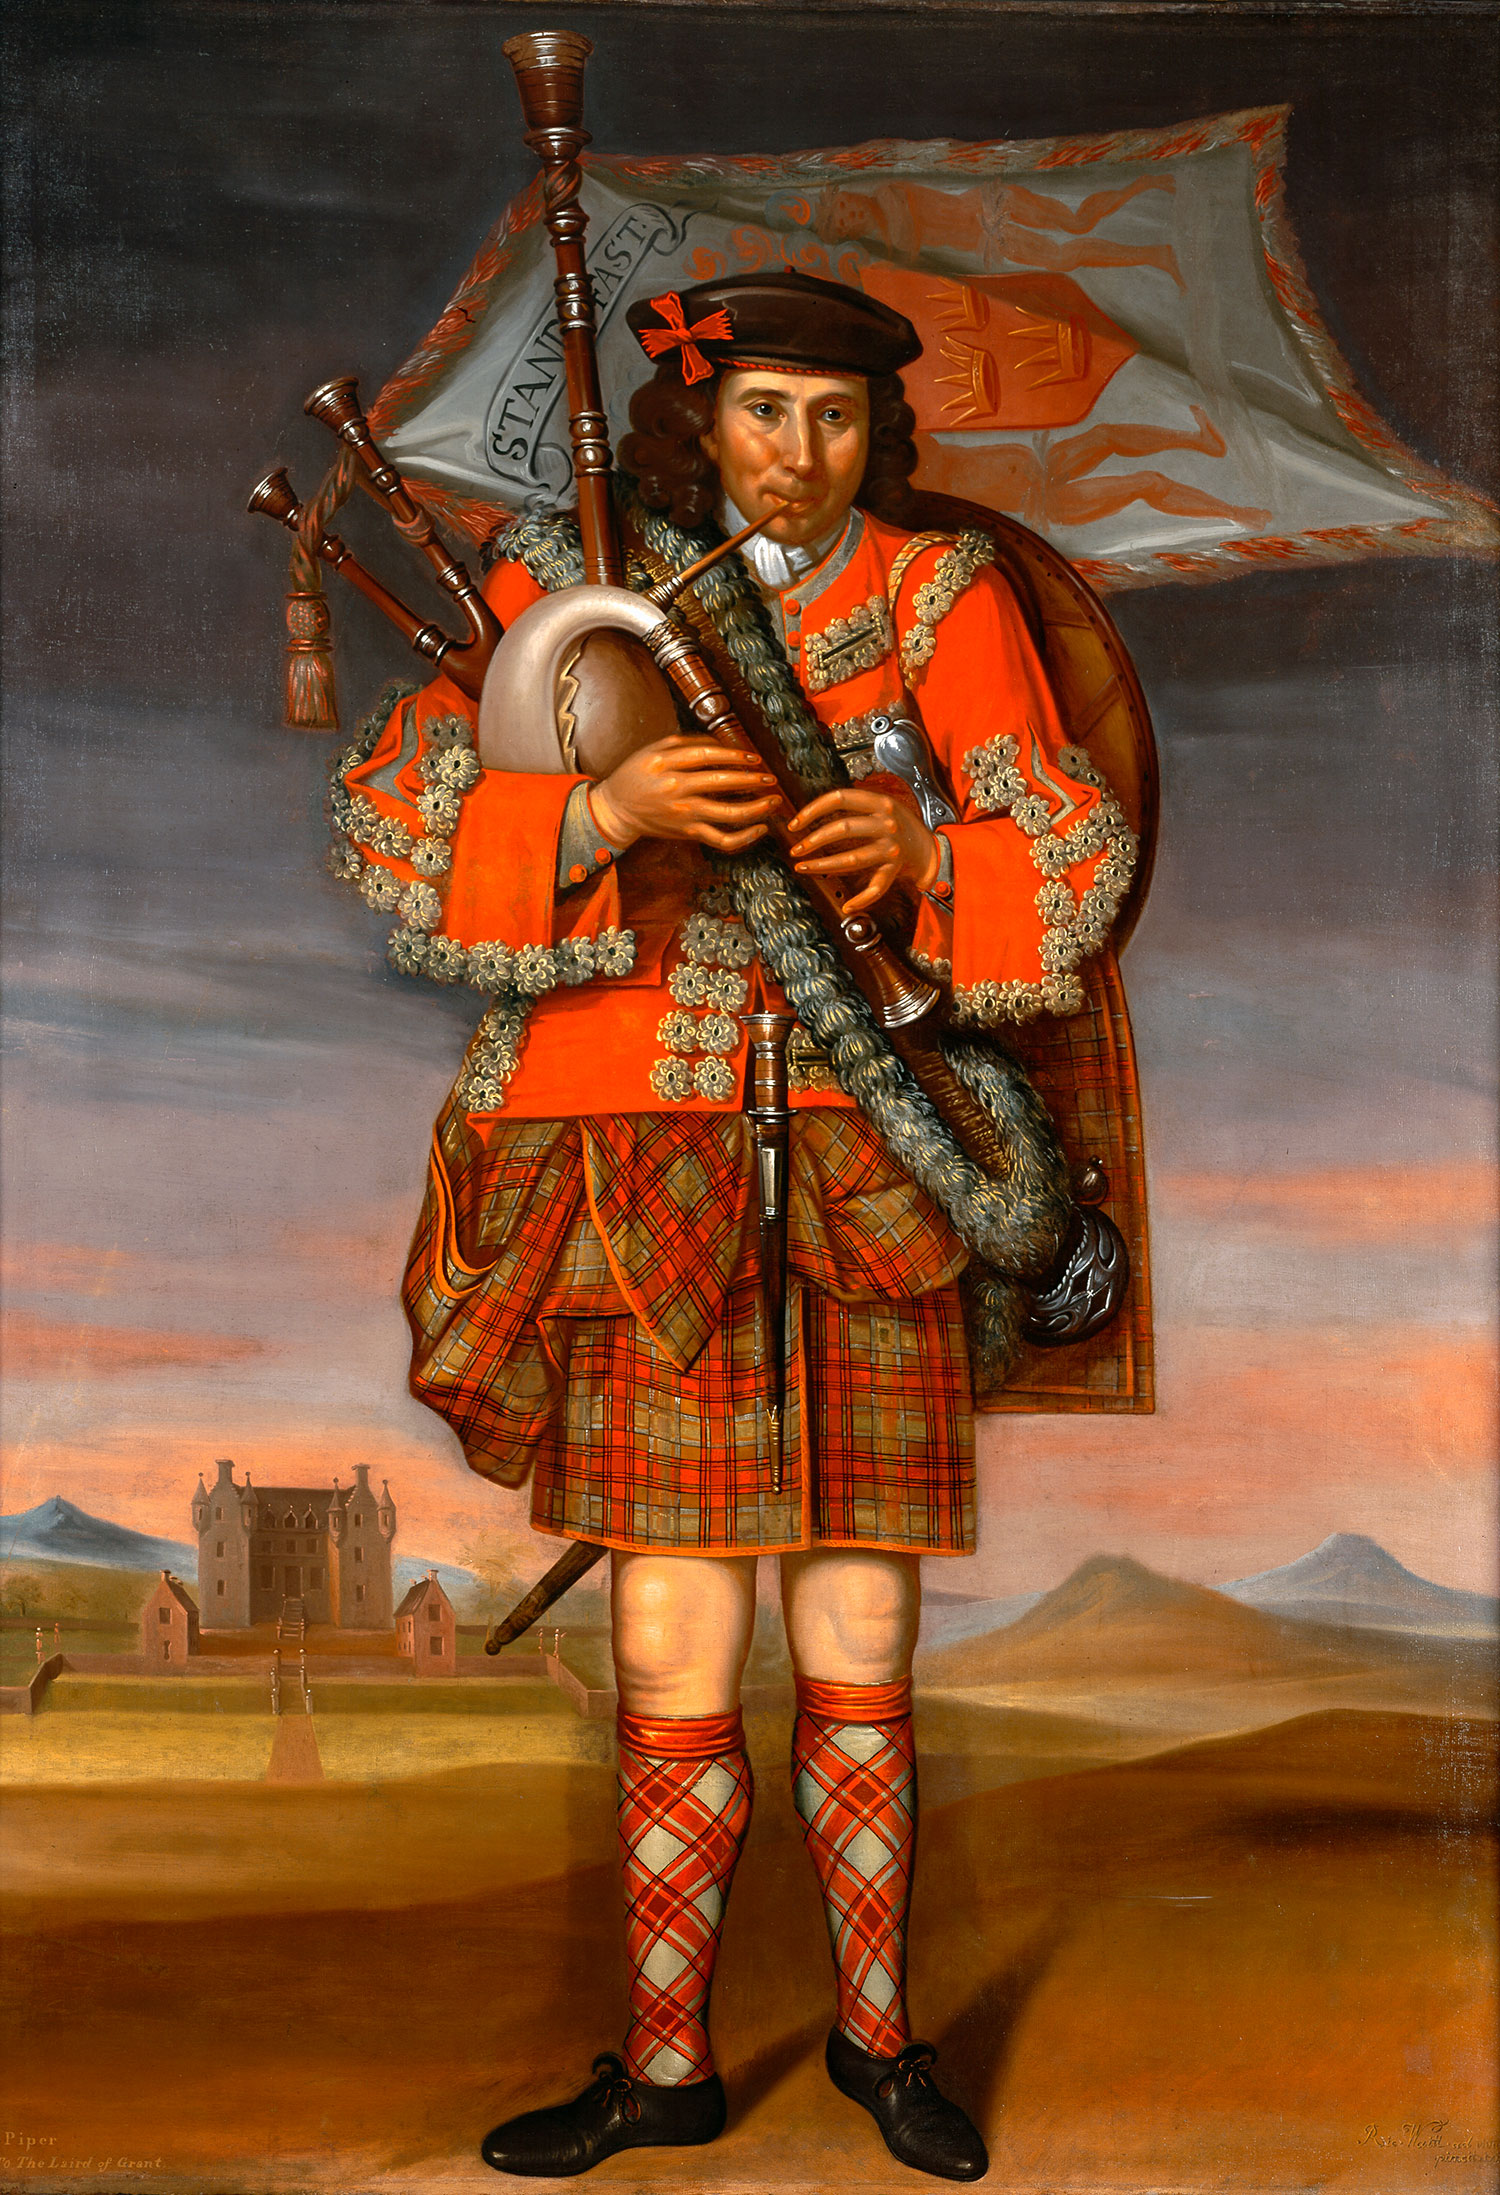 Painting of a man playing the bagpipes in the countryside. He is wearing a uniform of red tartan.